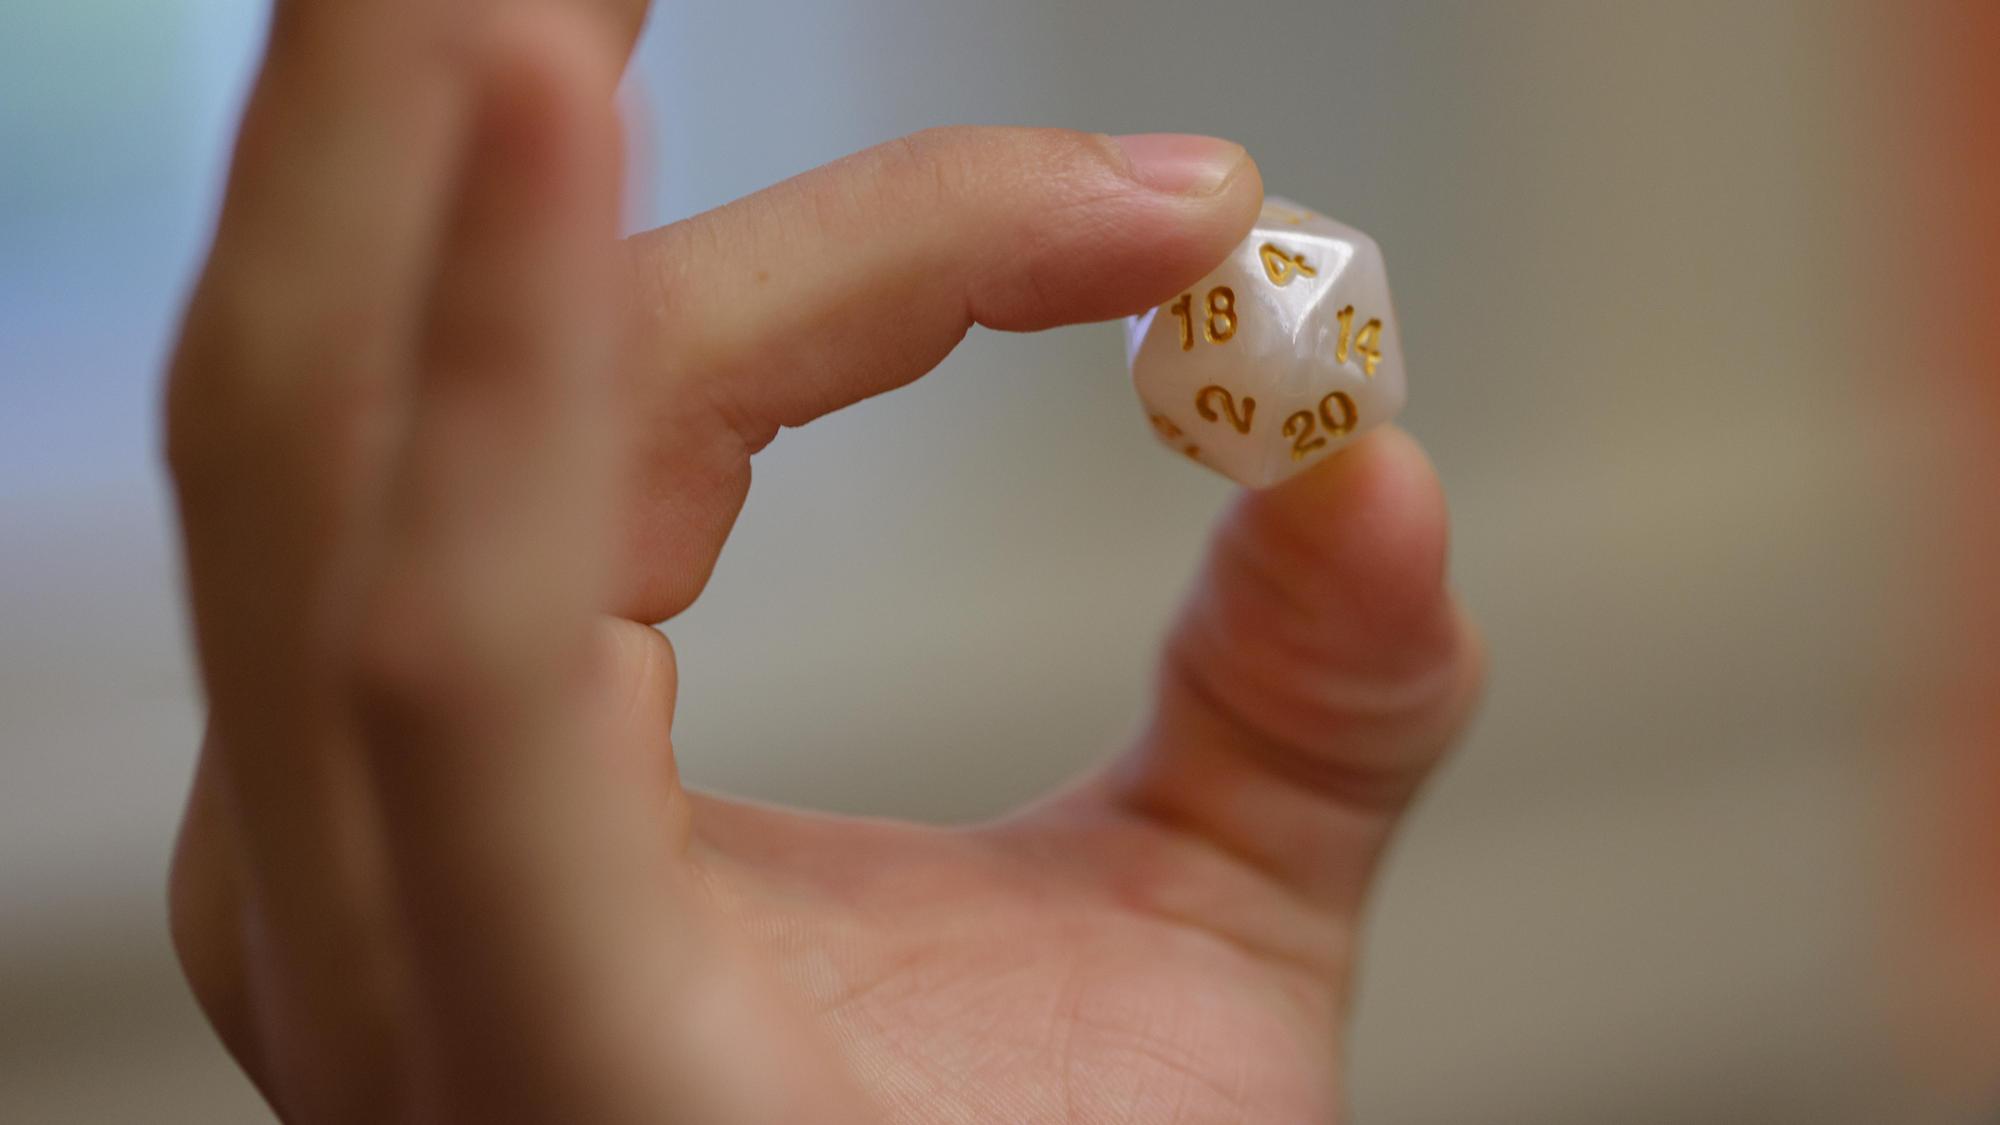 A 20-sided die was one mechanism of movement studied during a MayX course on board games.